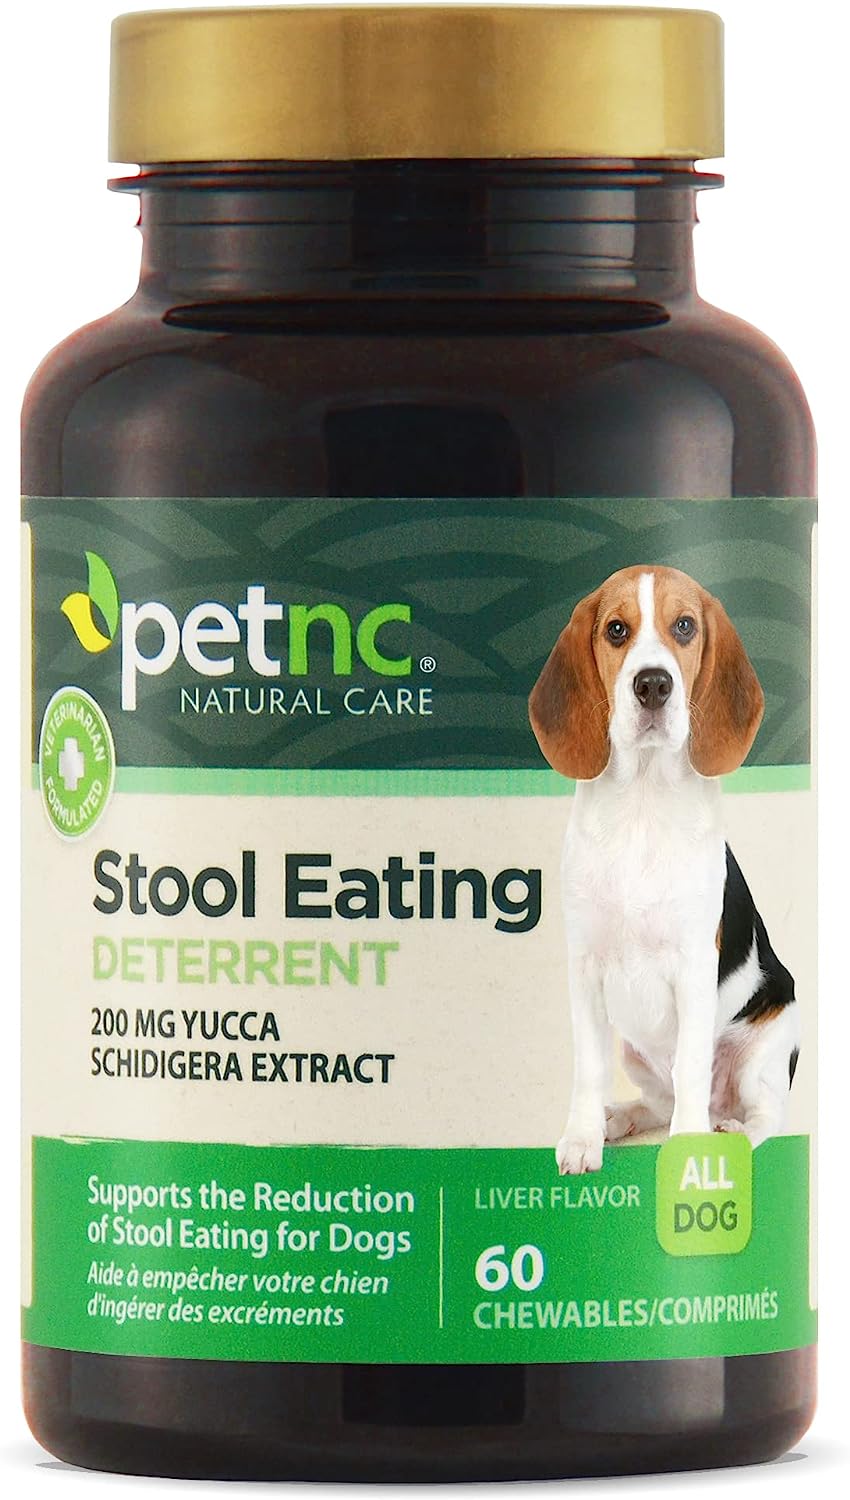 11. PetNC Natural Care Stool Eating Deterrent Chewables for Dogs